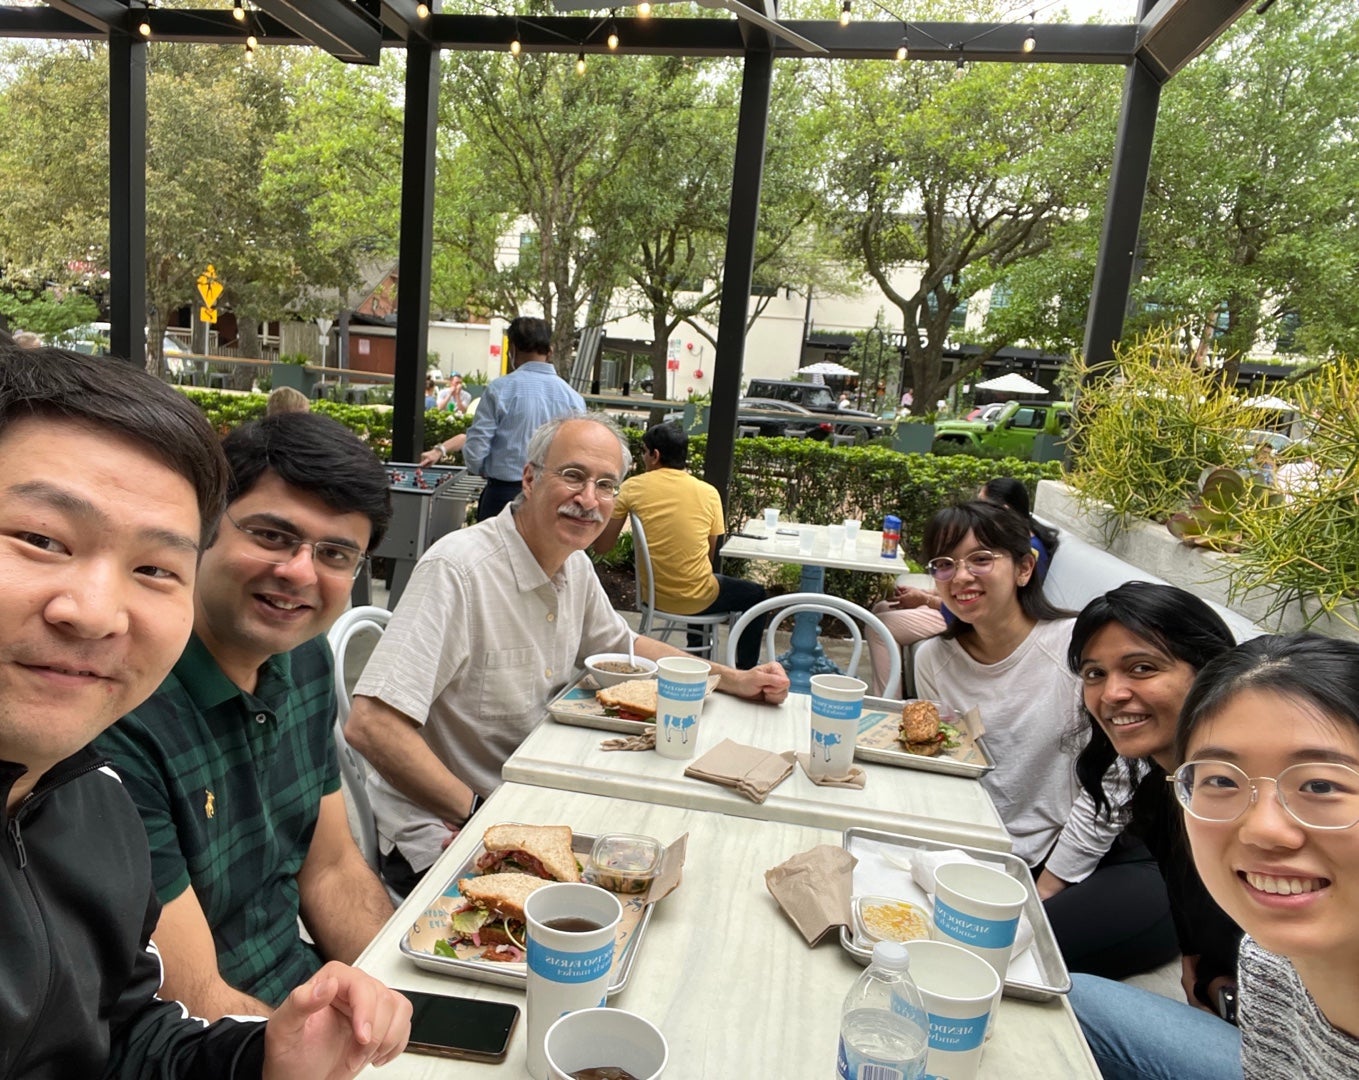 LAB LUNCH AT Mendocino Farms (04/15/2022)